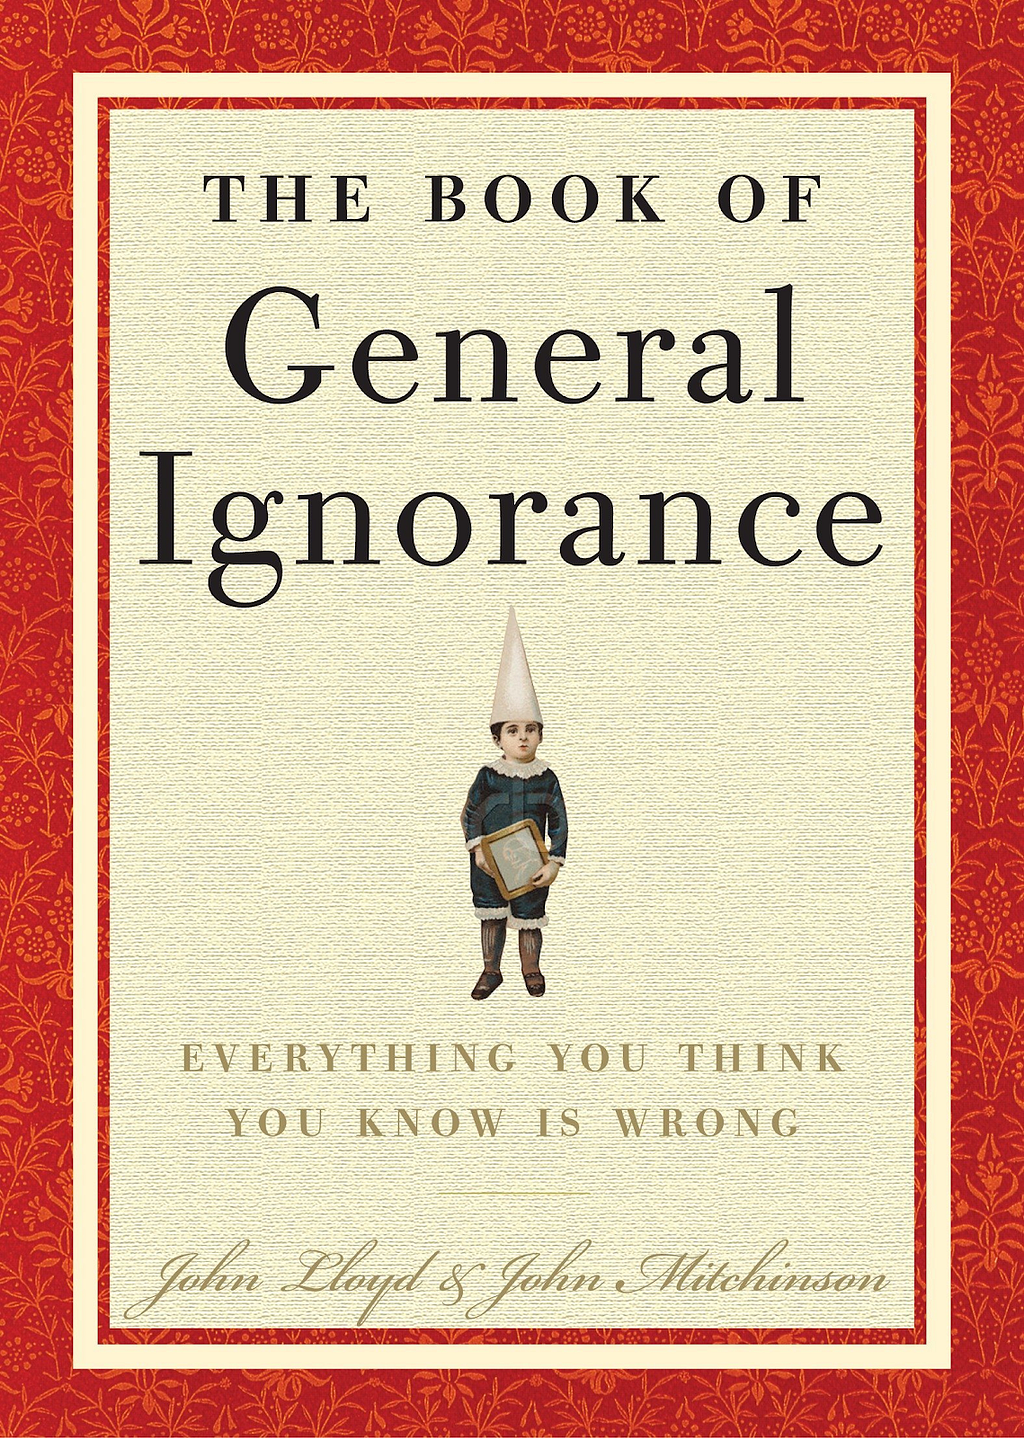 The Book of General Ignorance: Everything You Think You Know Is Wrong